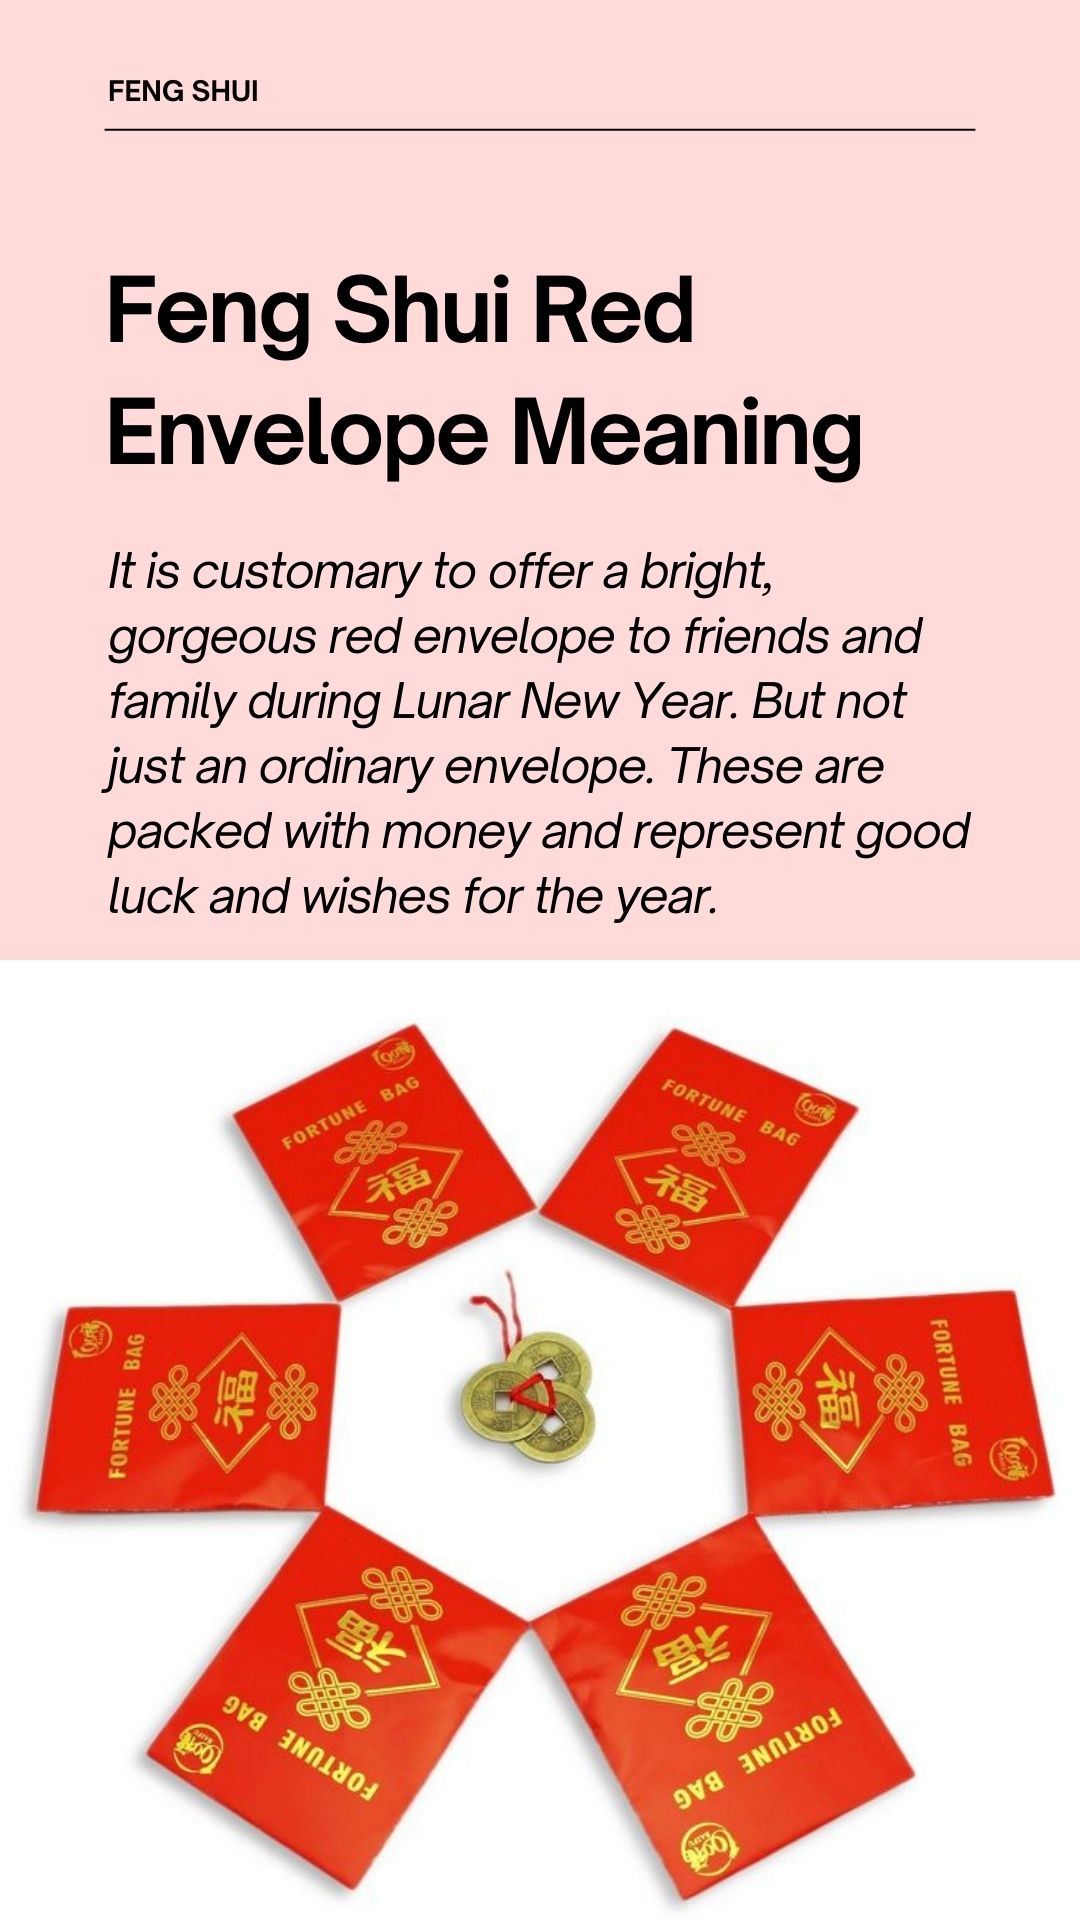 Feng Shui Red Envelope Meaning